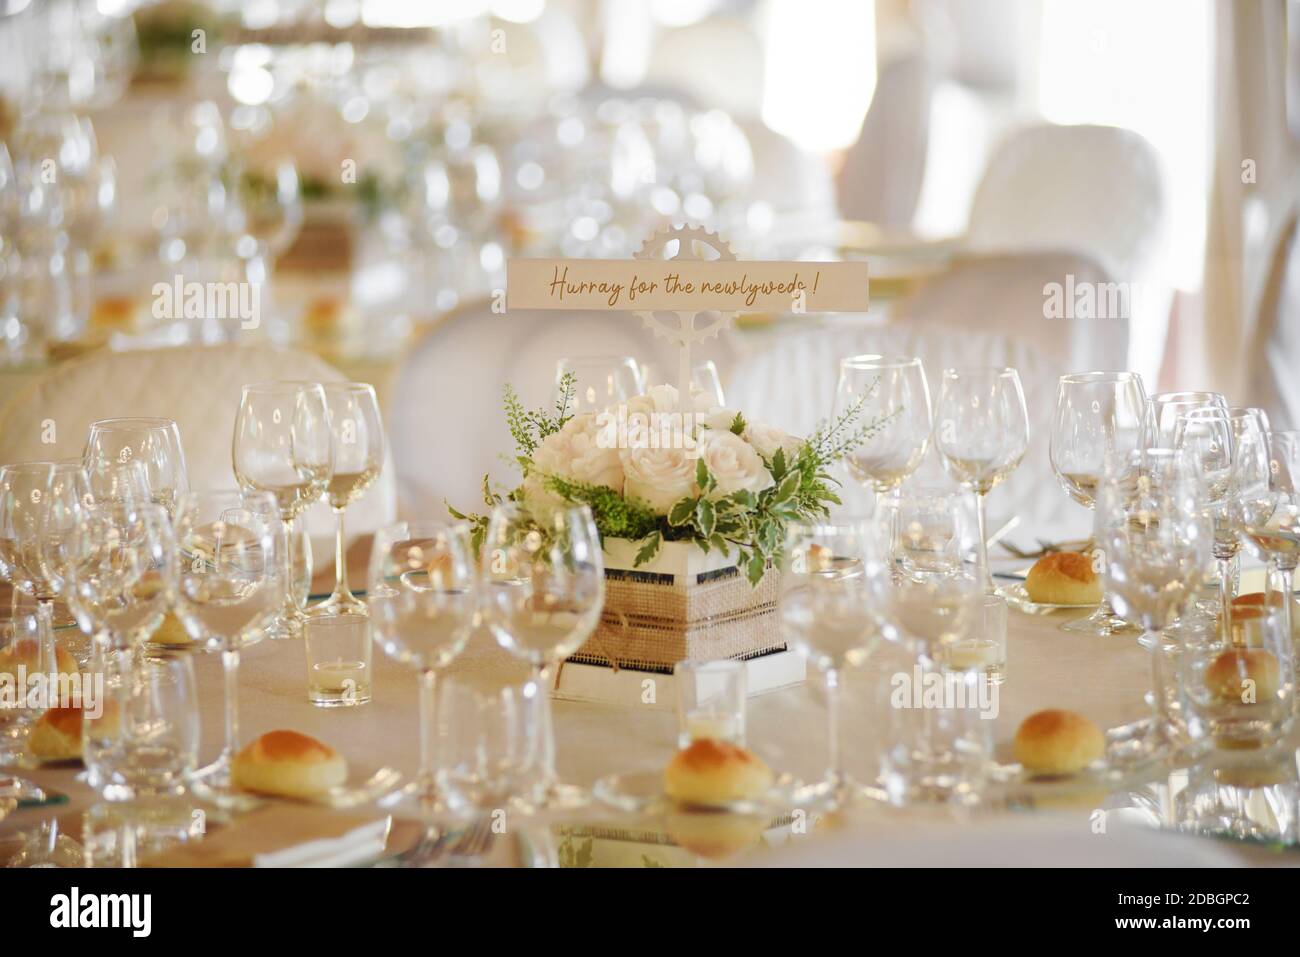 Wedding venue with formal table settings with elegant glassware and small bread rolls around a centrepiece with handwritten message Stock Photo